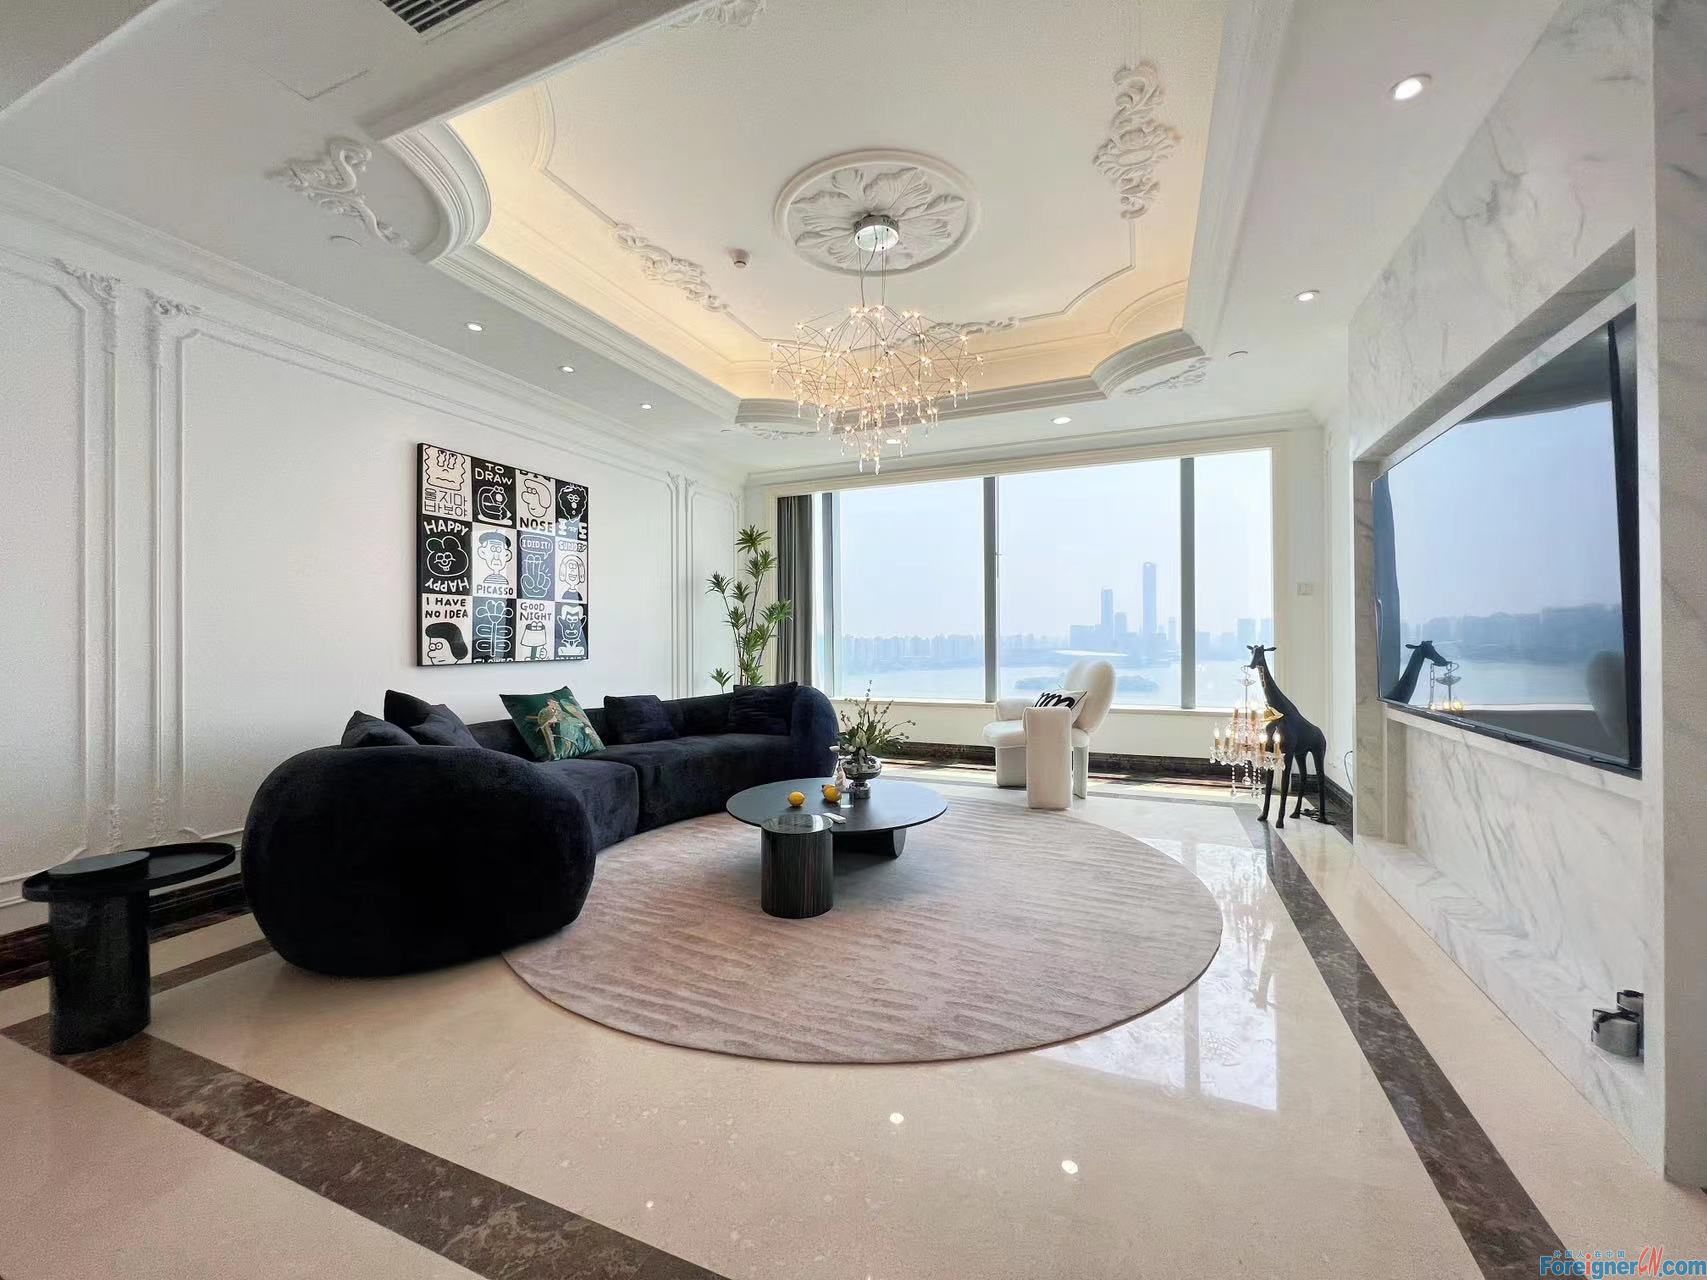 Luxurious!! High-end apartment for Expats to rent in Suzhou/4bedrooms,4baths/high floor with Jinji Lake view/Bathtub/ Close to Subway Station/Suzhou center shopping mall/a lot of Restaurants/SIP 